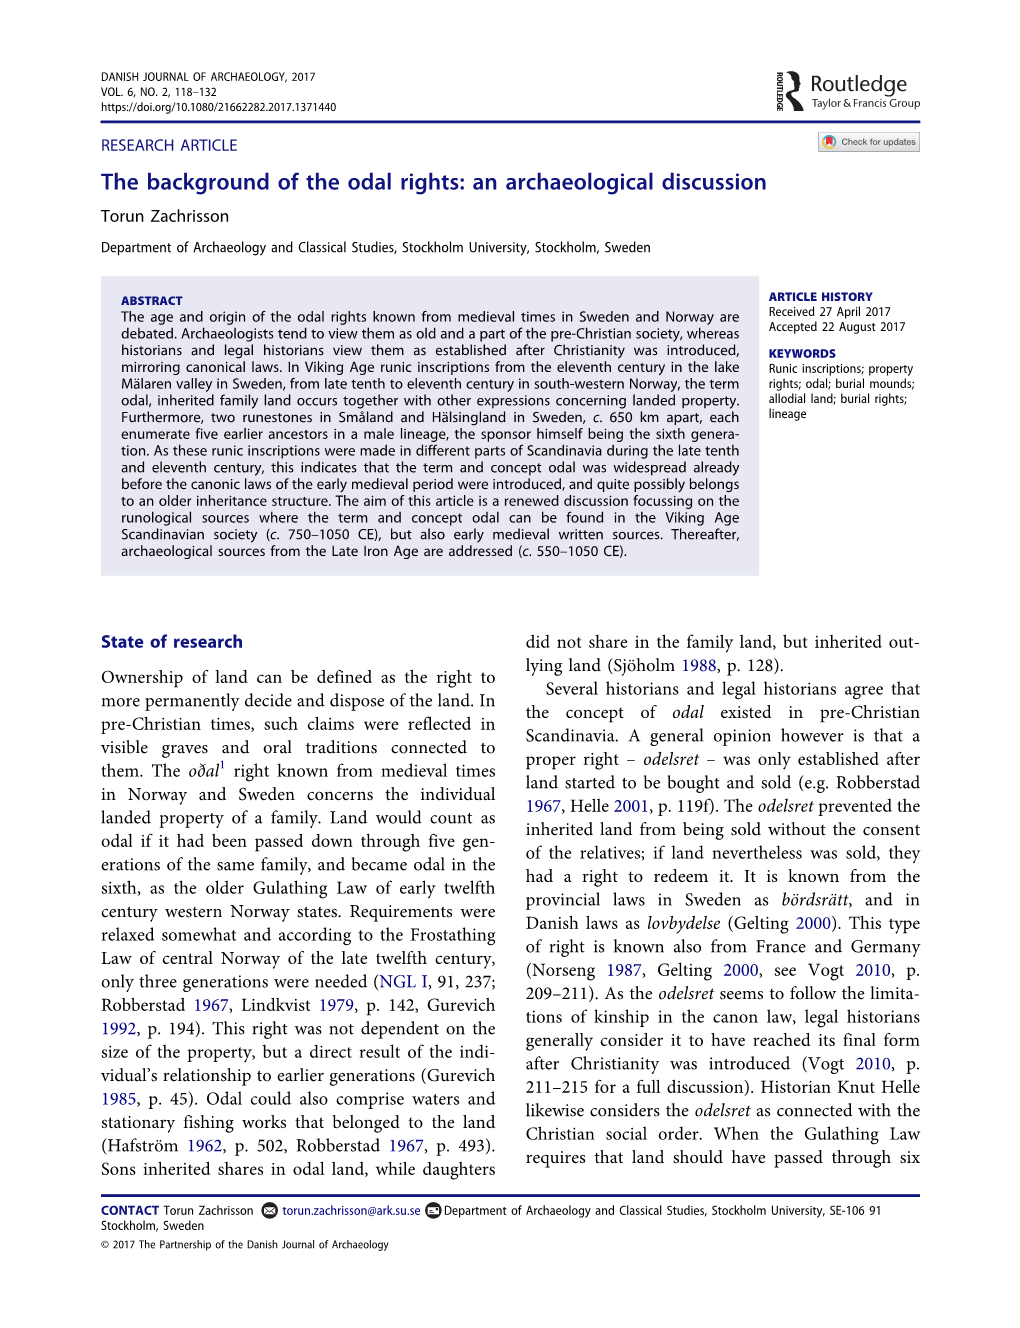 The Background of the Odal Rights: an Archaeological